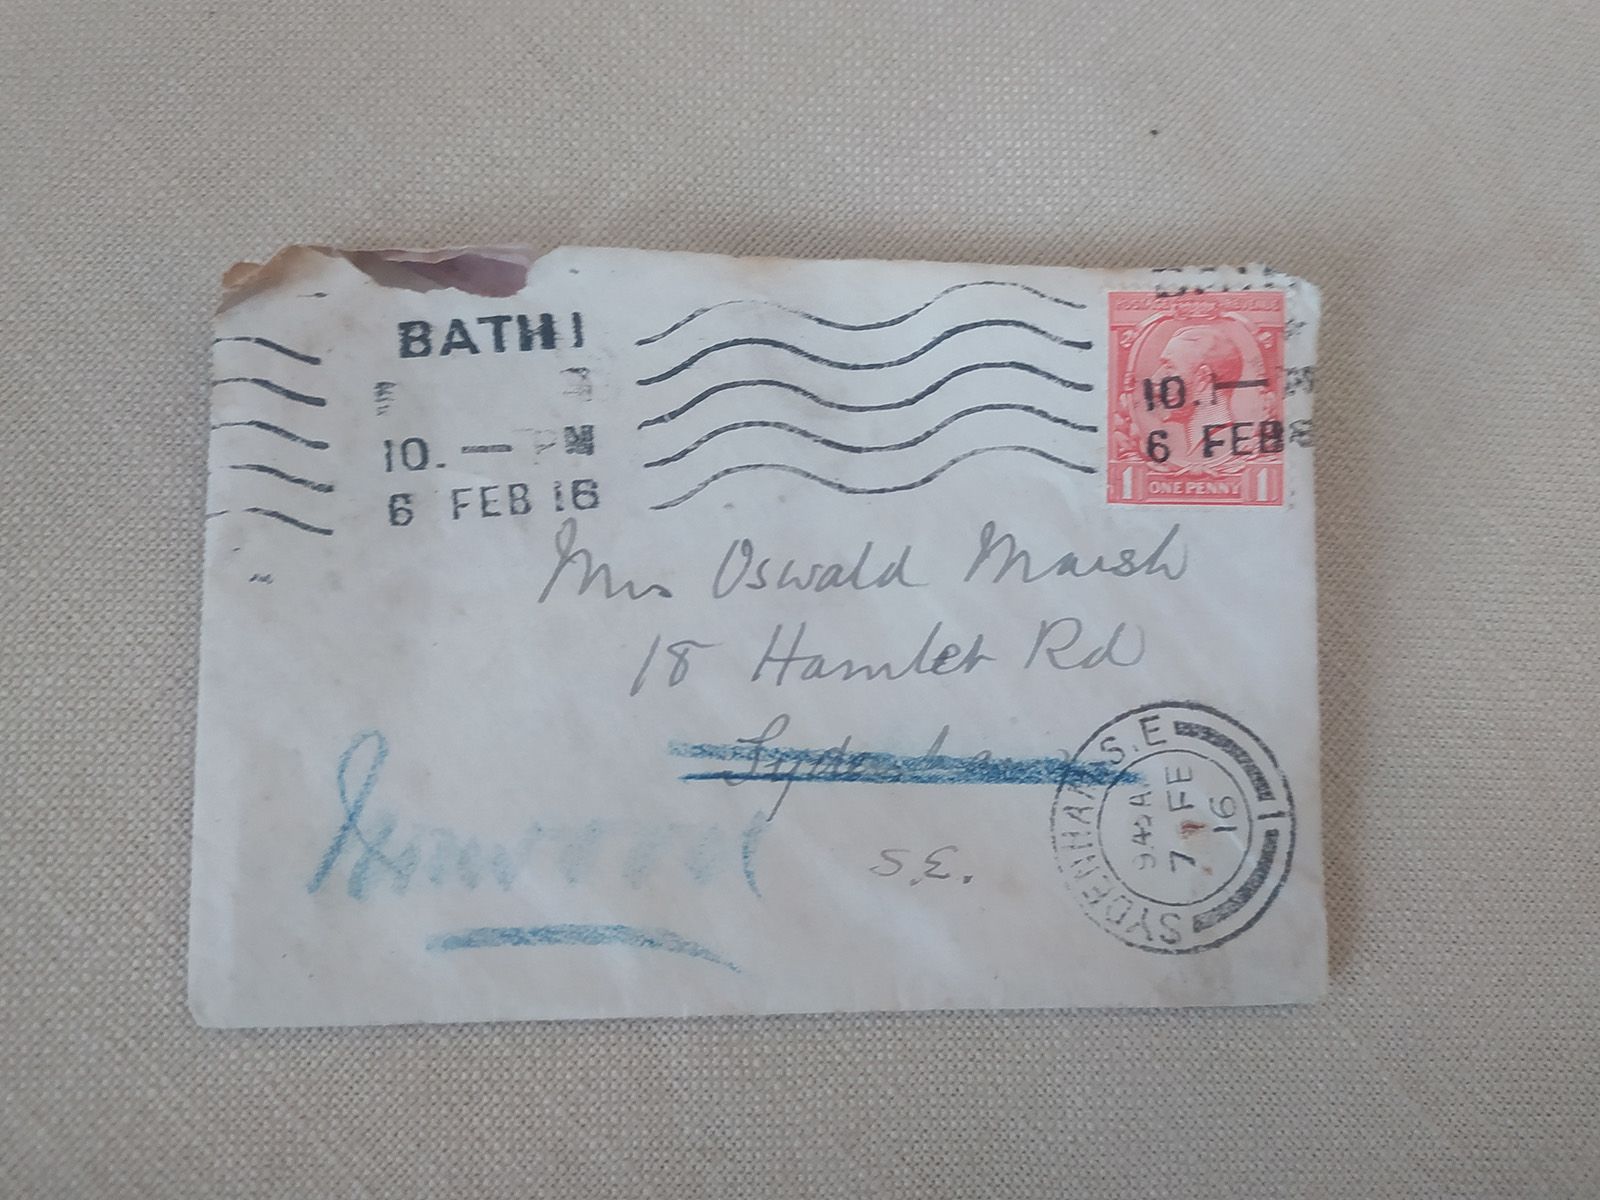 Letter Reaches Its Destination More Than 100 Years After Being Posted